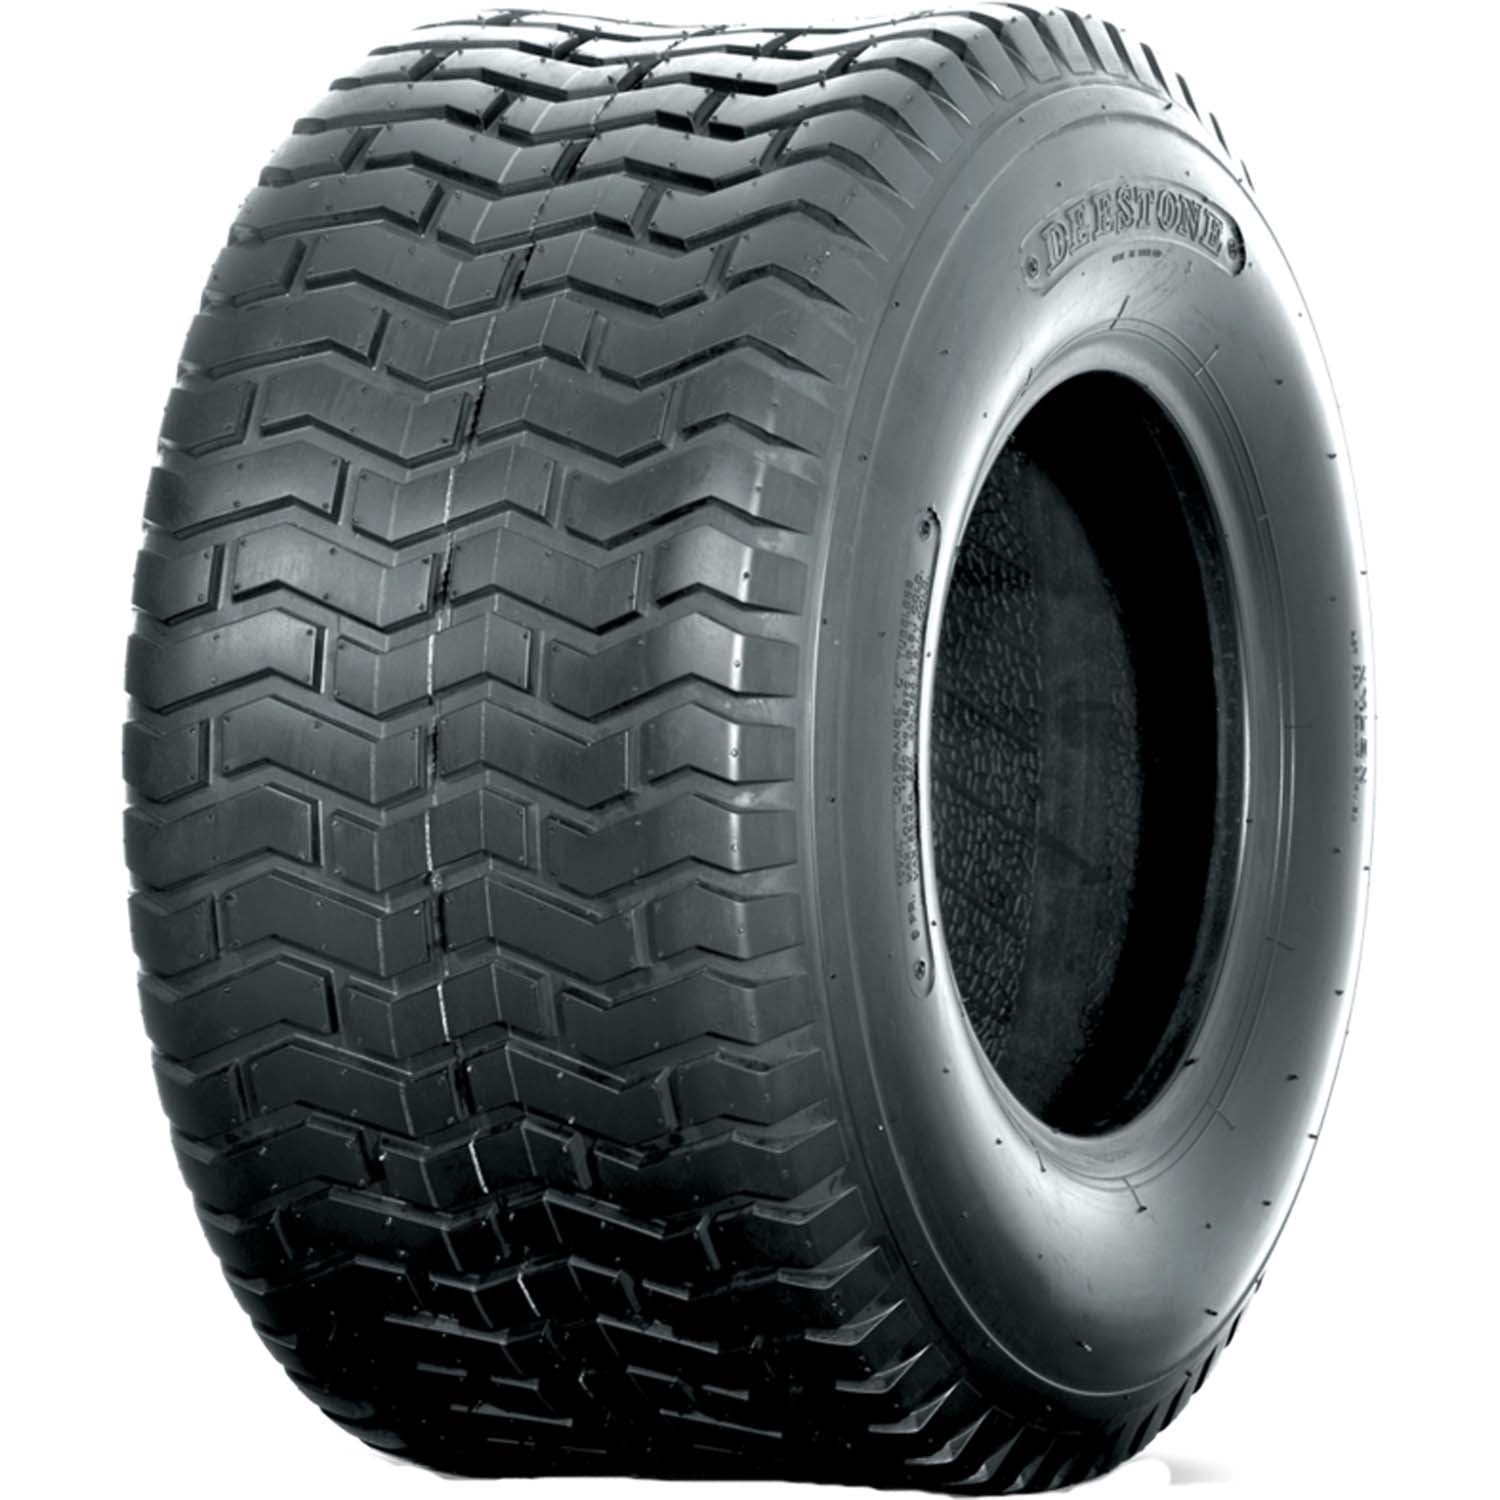 Deestone D265 Lawn and Garden Tire 4ply 24x12.00-12